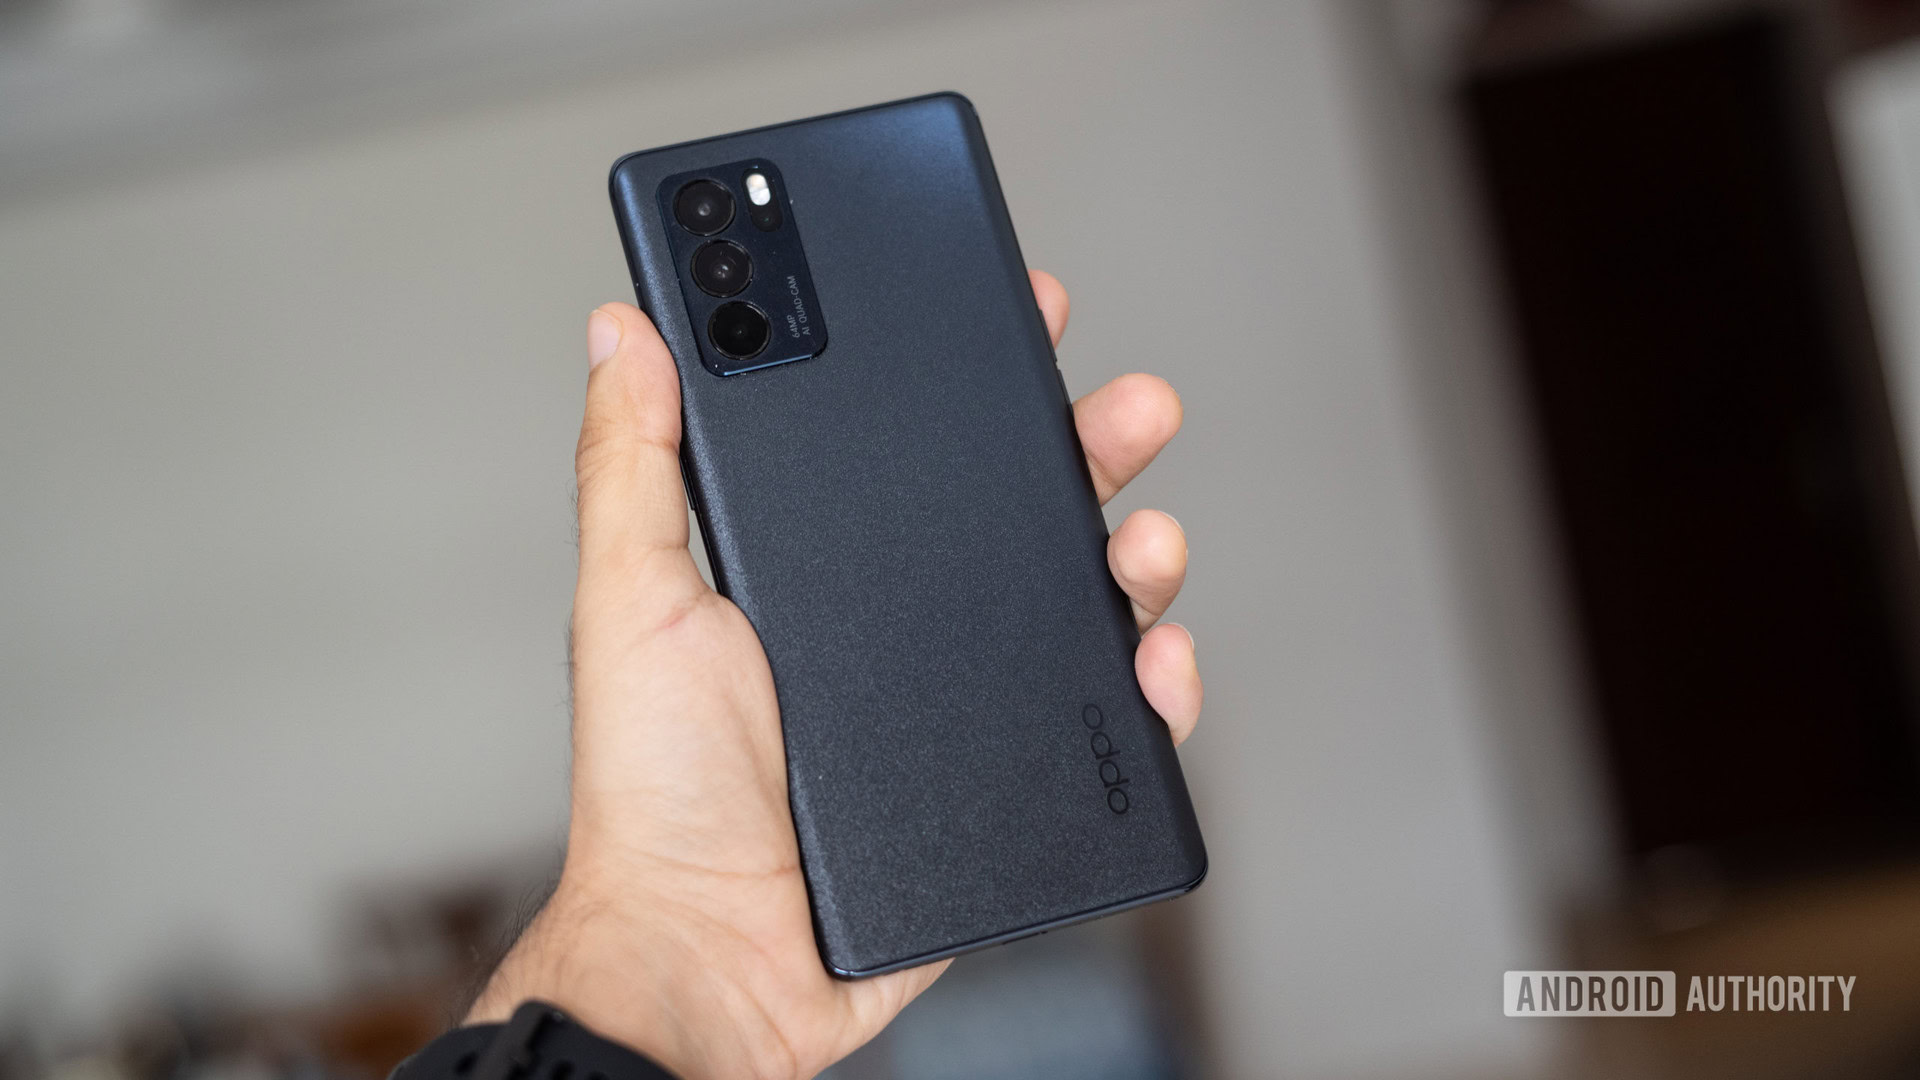 The OPPO Reno 6 Pro in hand showing the back and camera module.